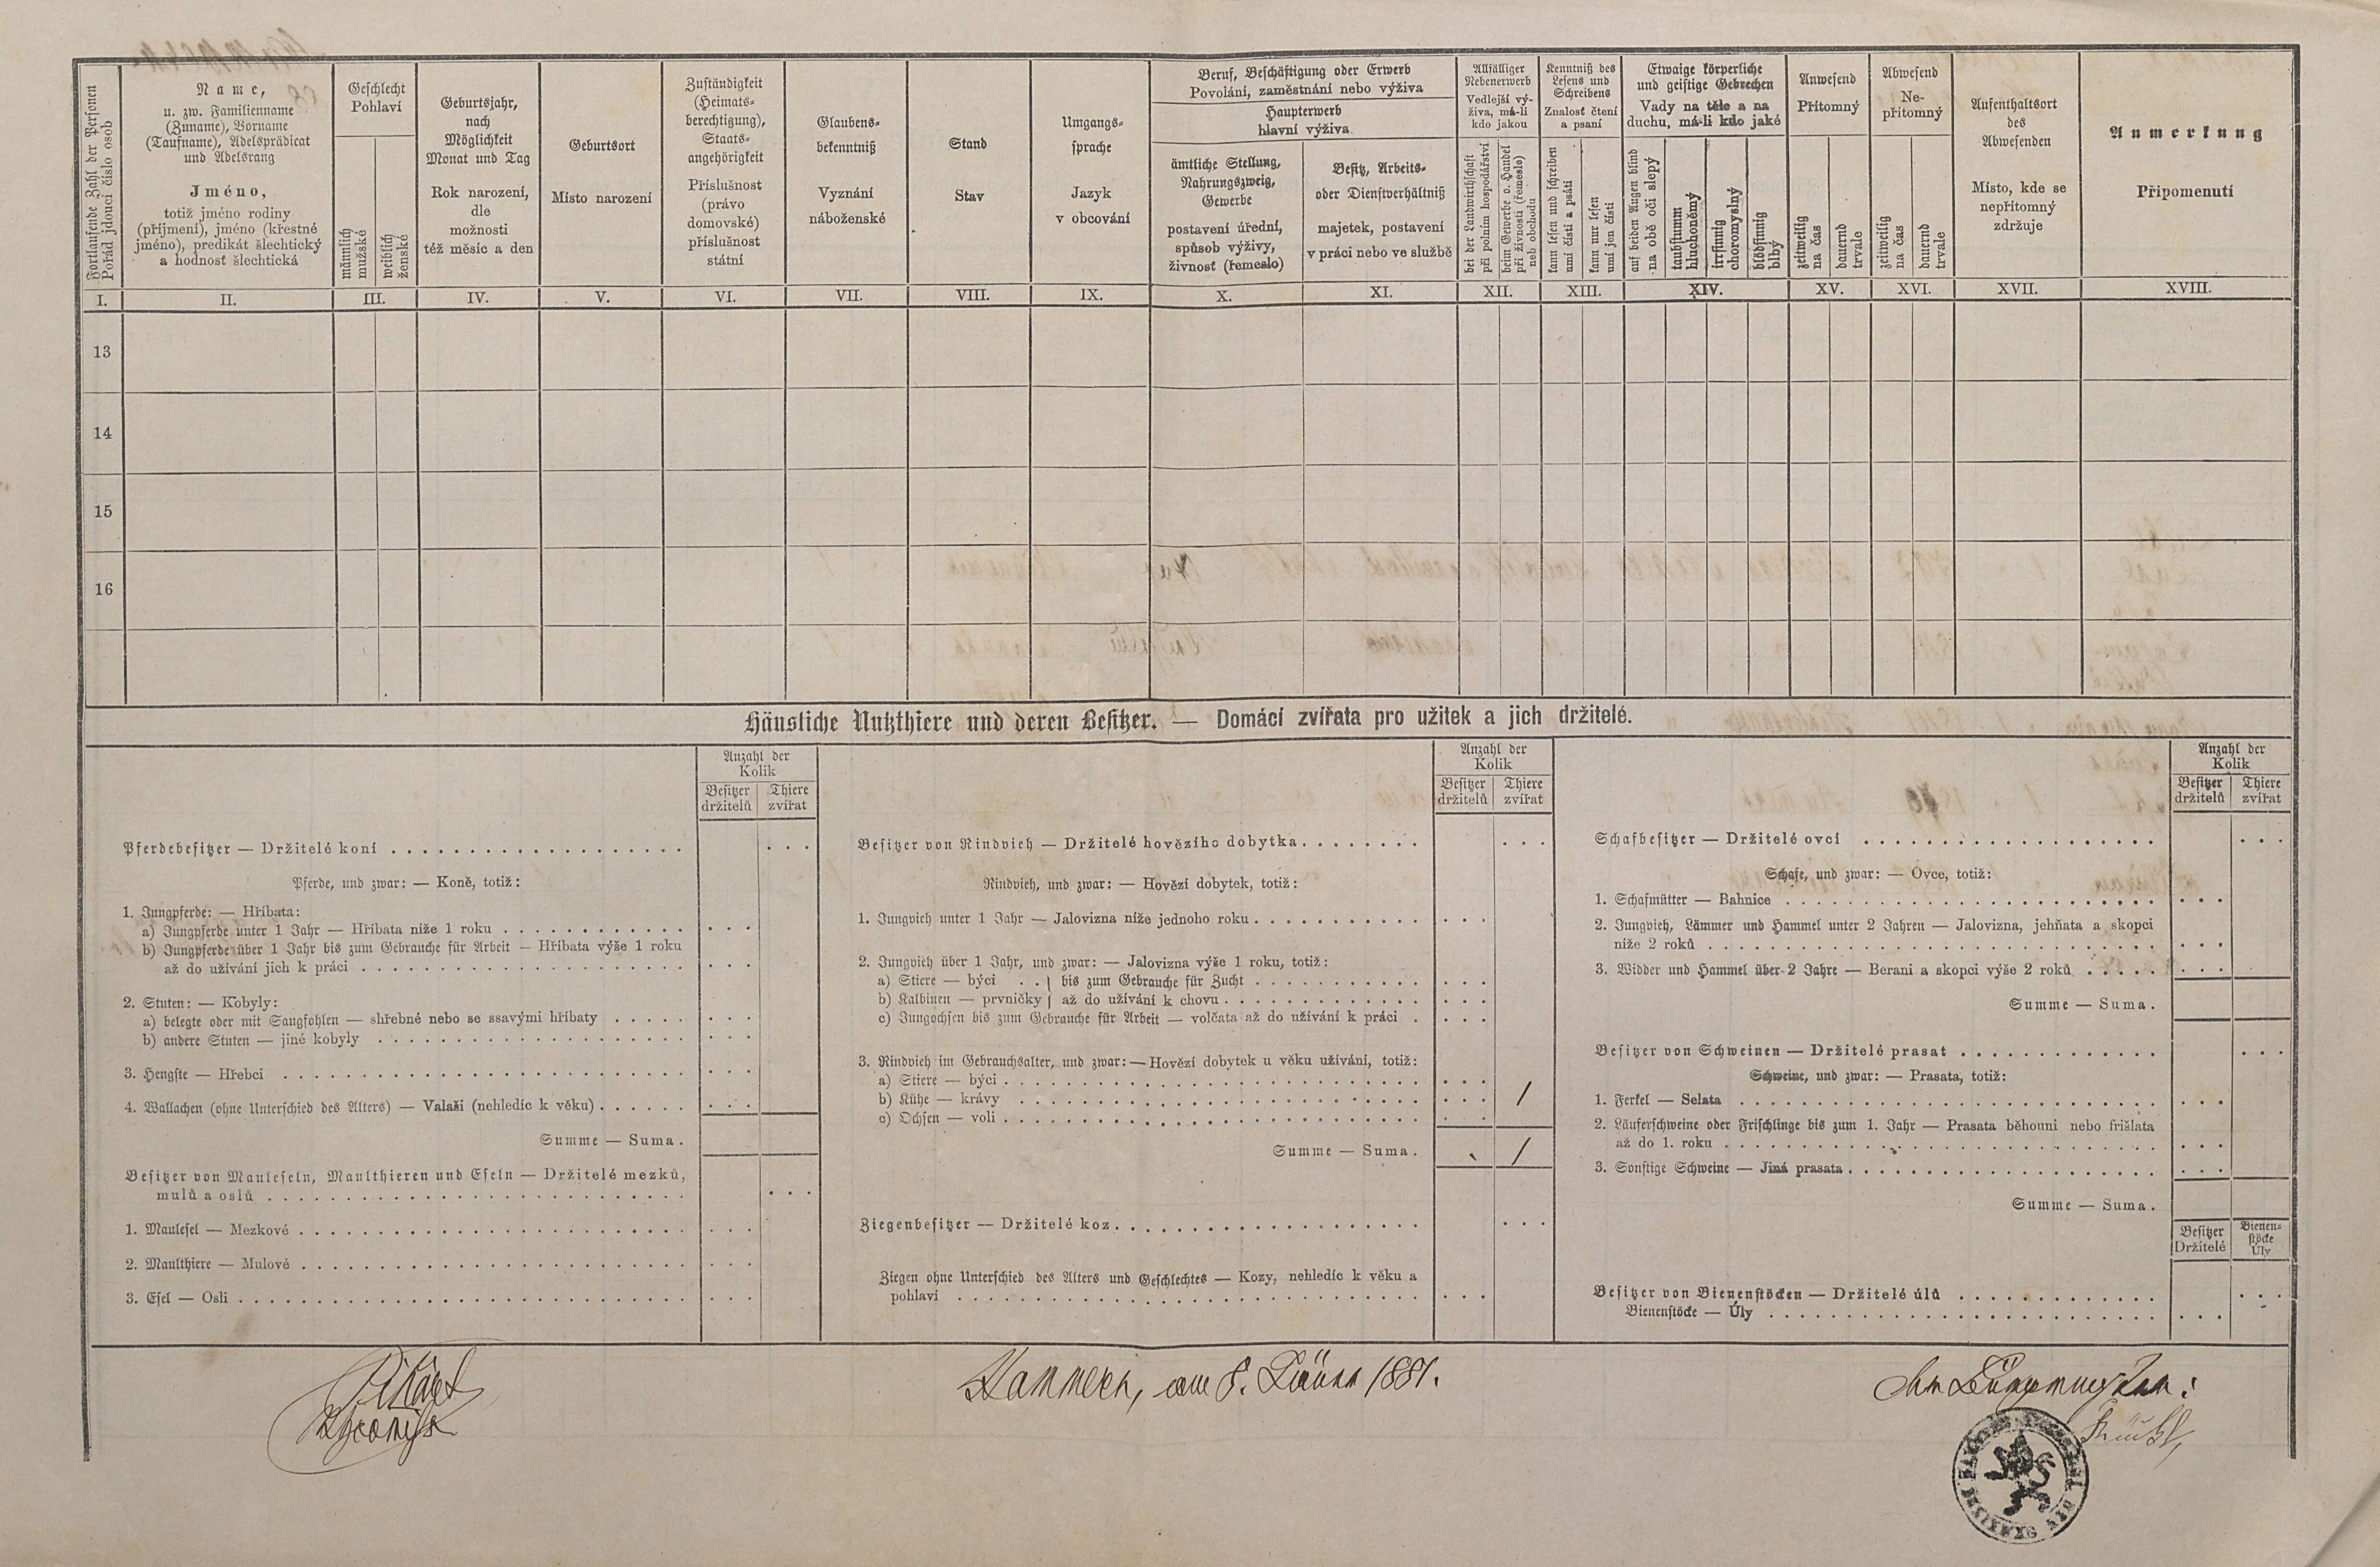 2. soap-kt_01159_census-1880-hamry-cp088_0020